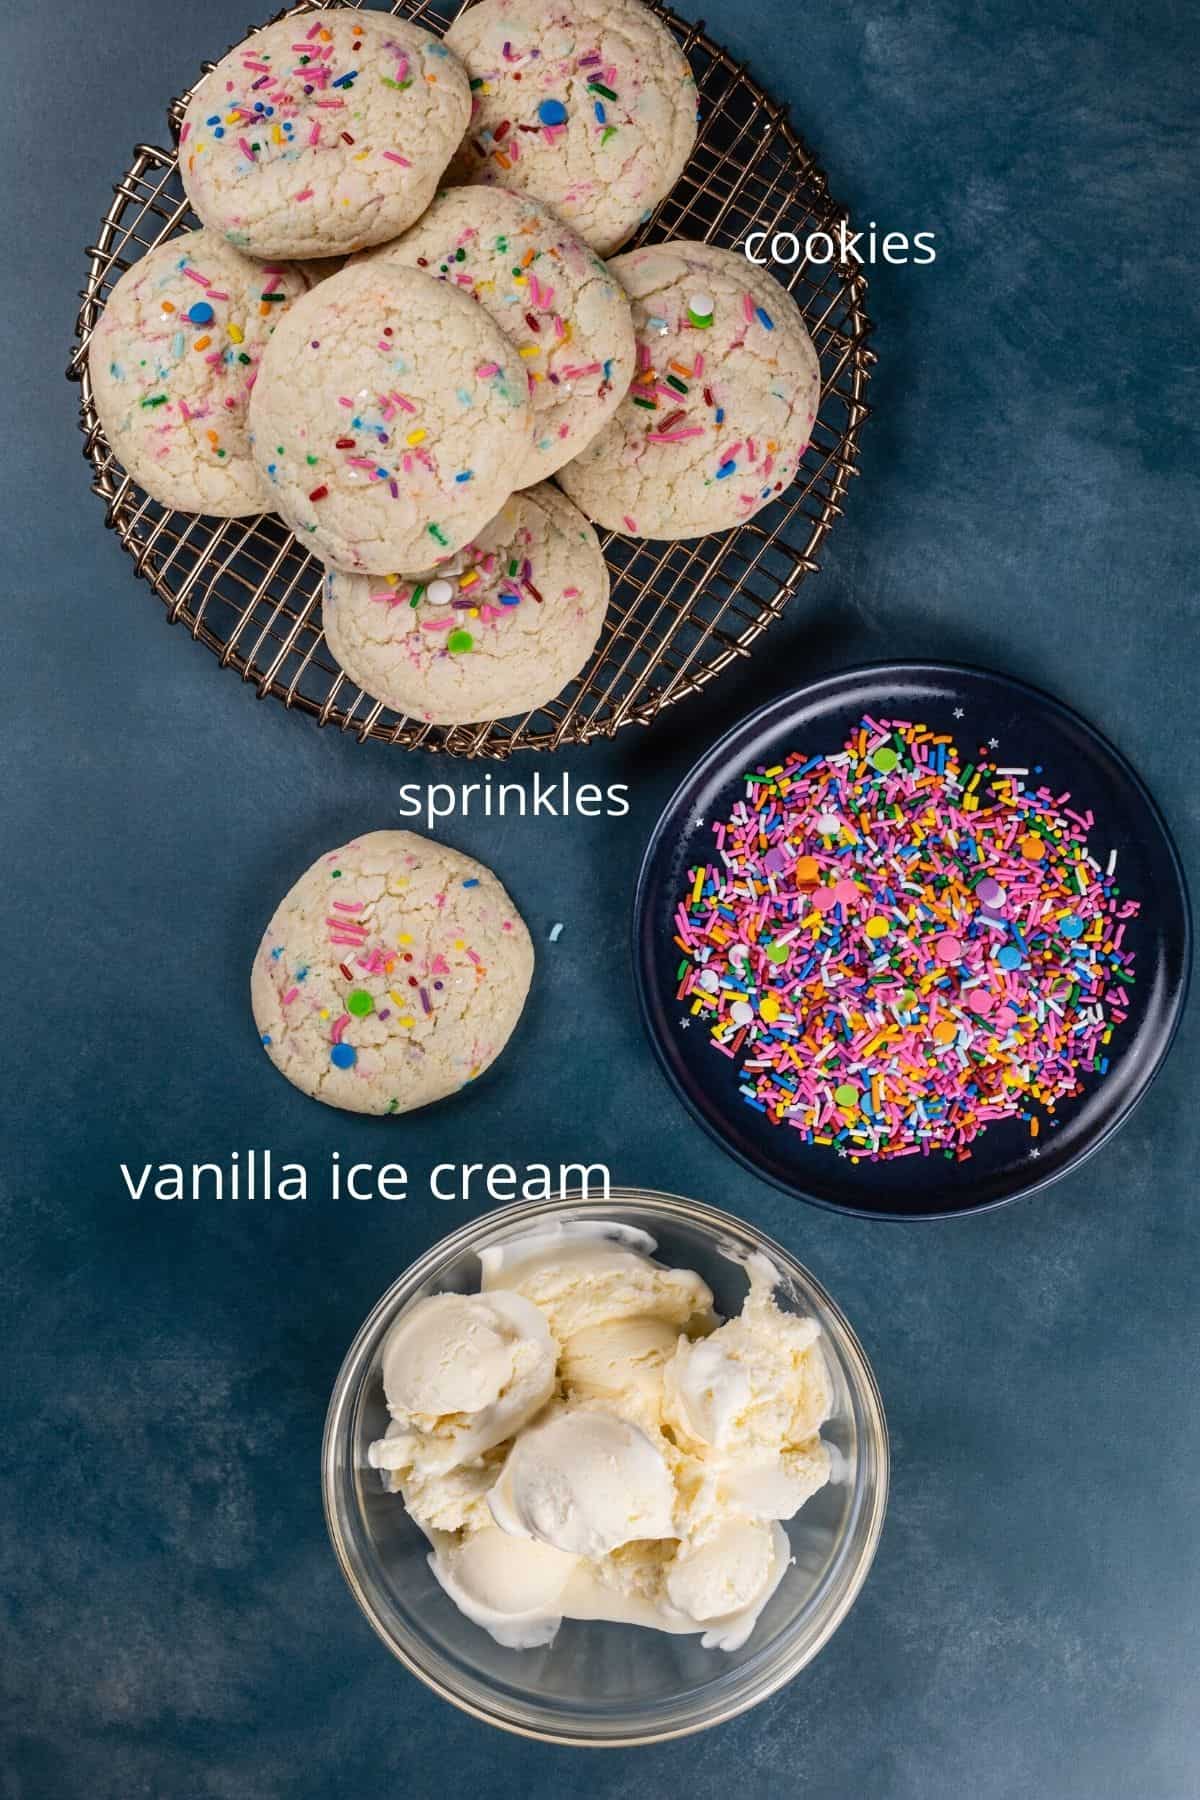 ingredients for ice cream sandwiches with labels in white text